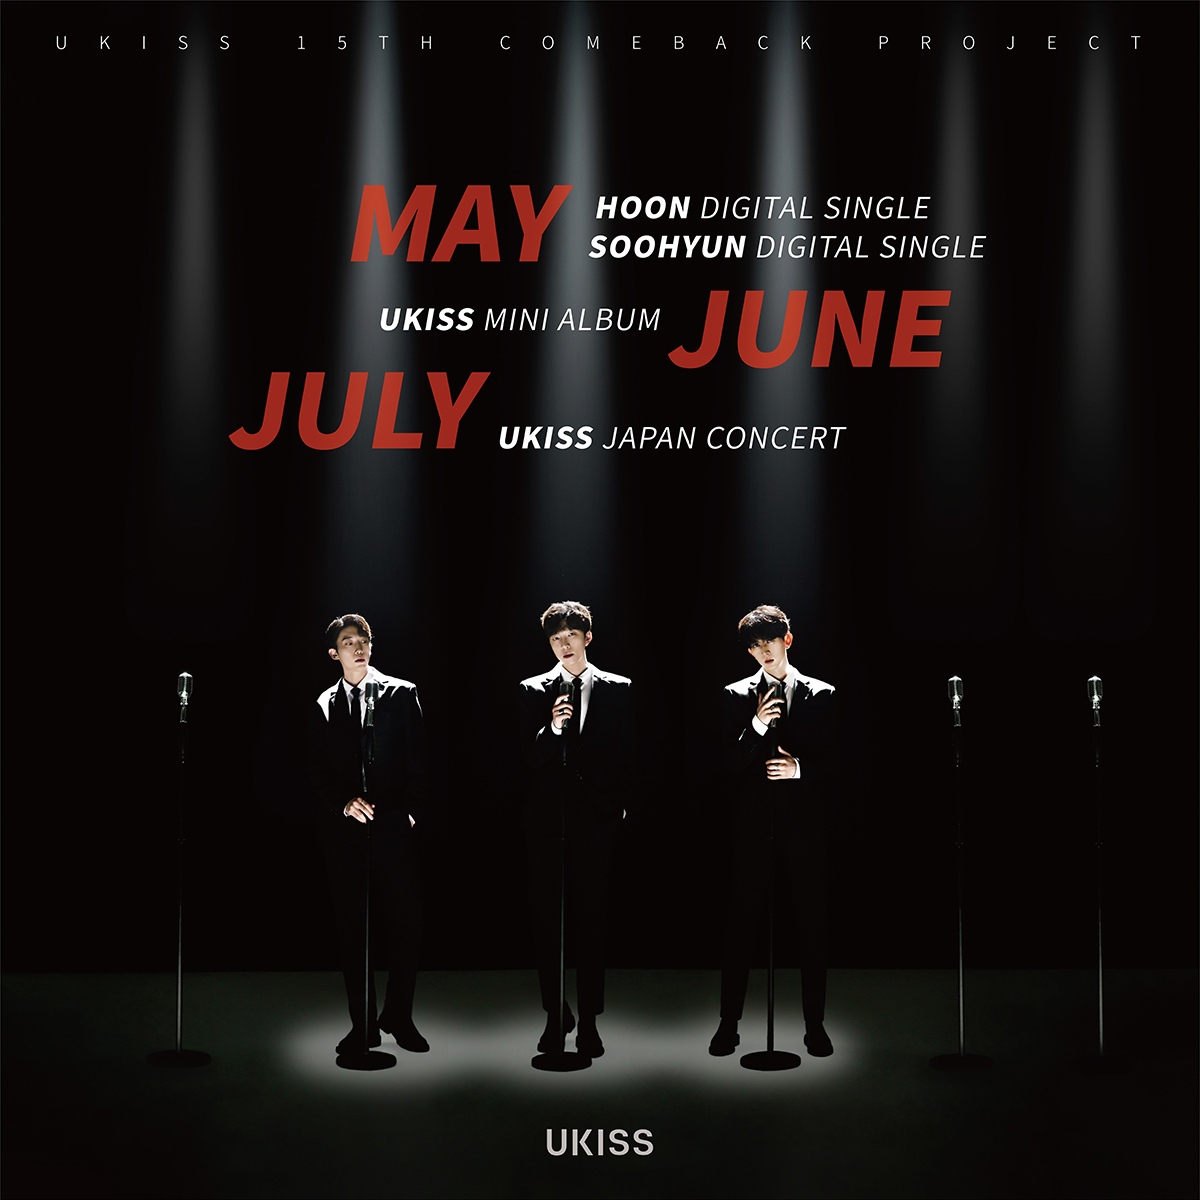 Ukiss' comeback poster shows the group will drop a new album in June and hold concerts in Japan in July. (Tango Music)